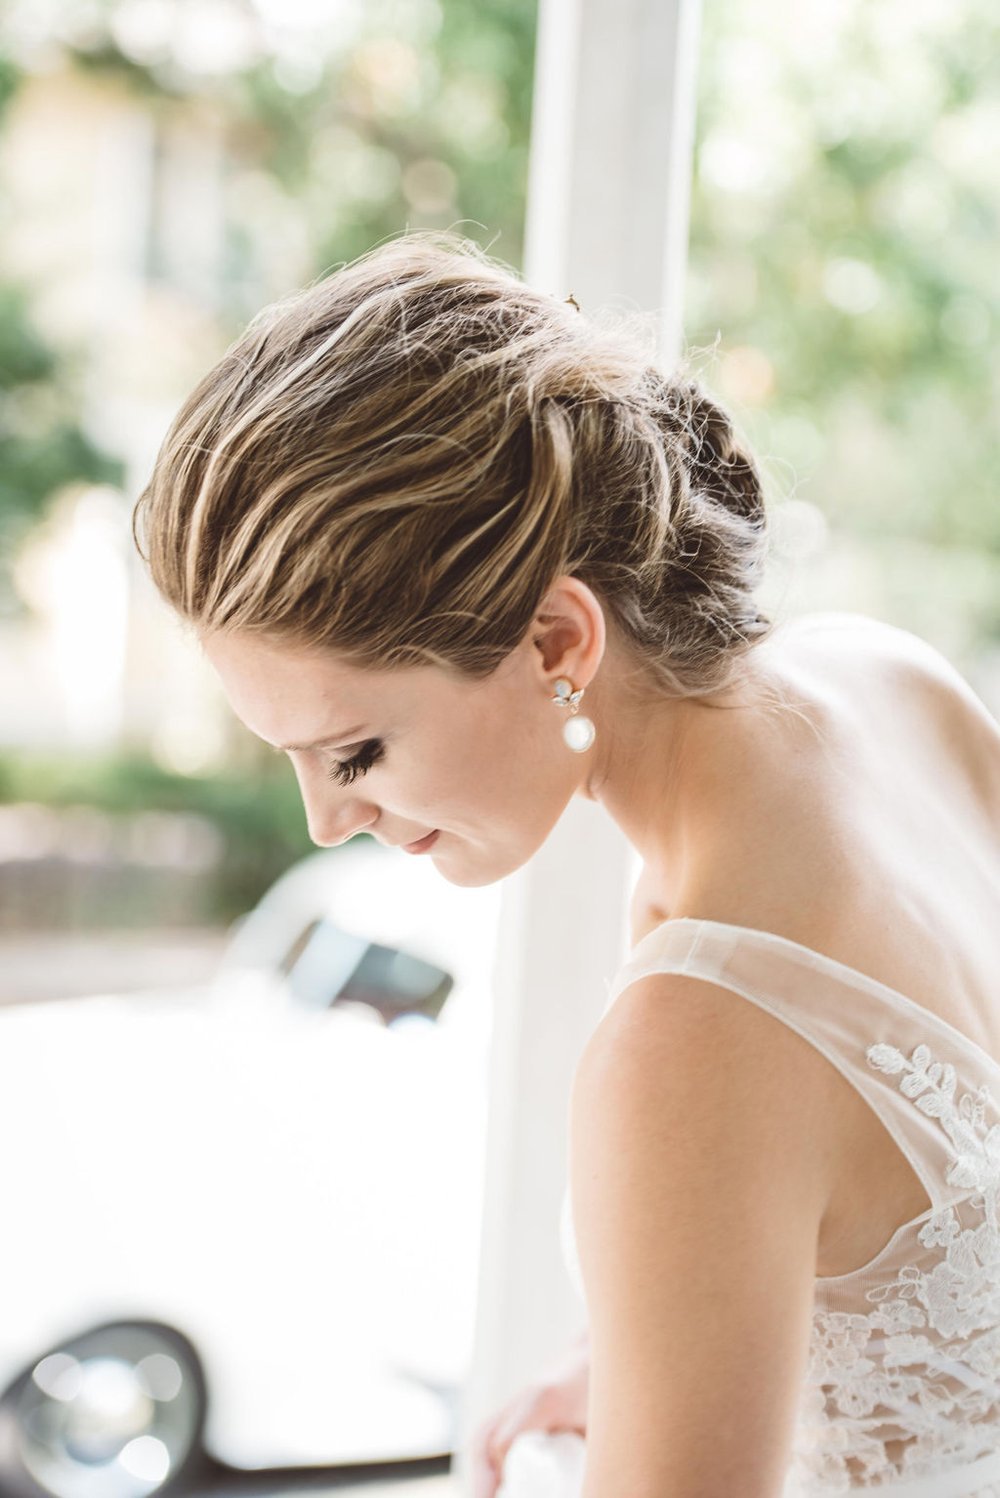 A bride in a lace dress gazes out the window, filled with anticipation and excitement for her.jpg